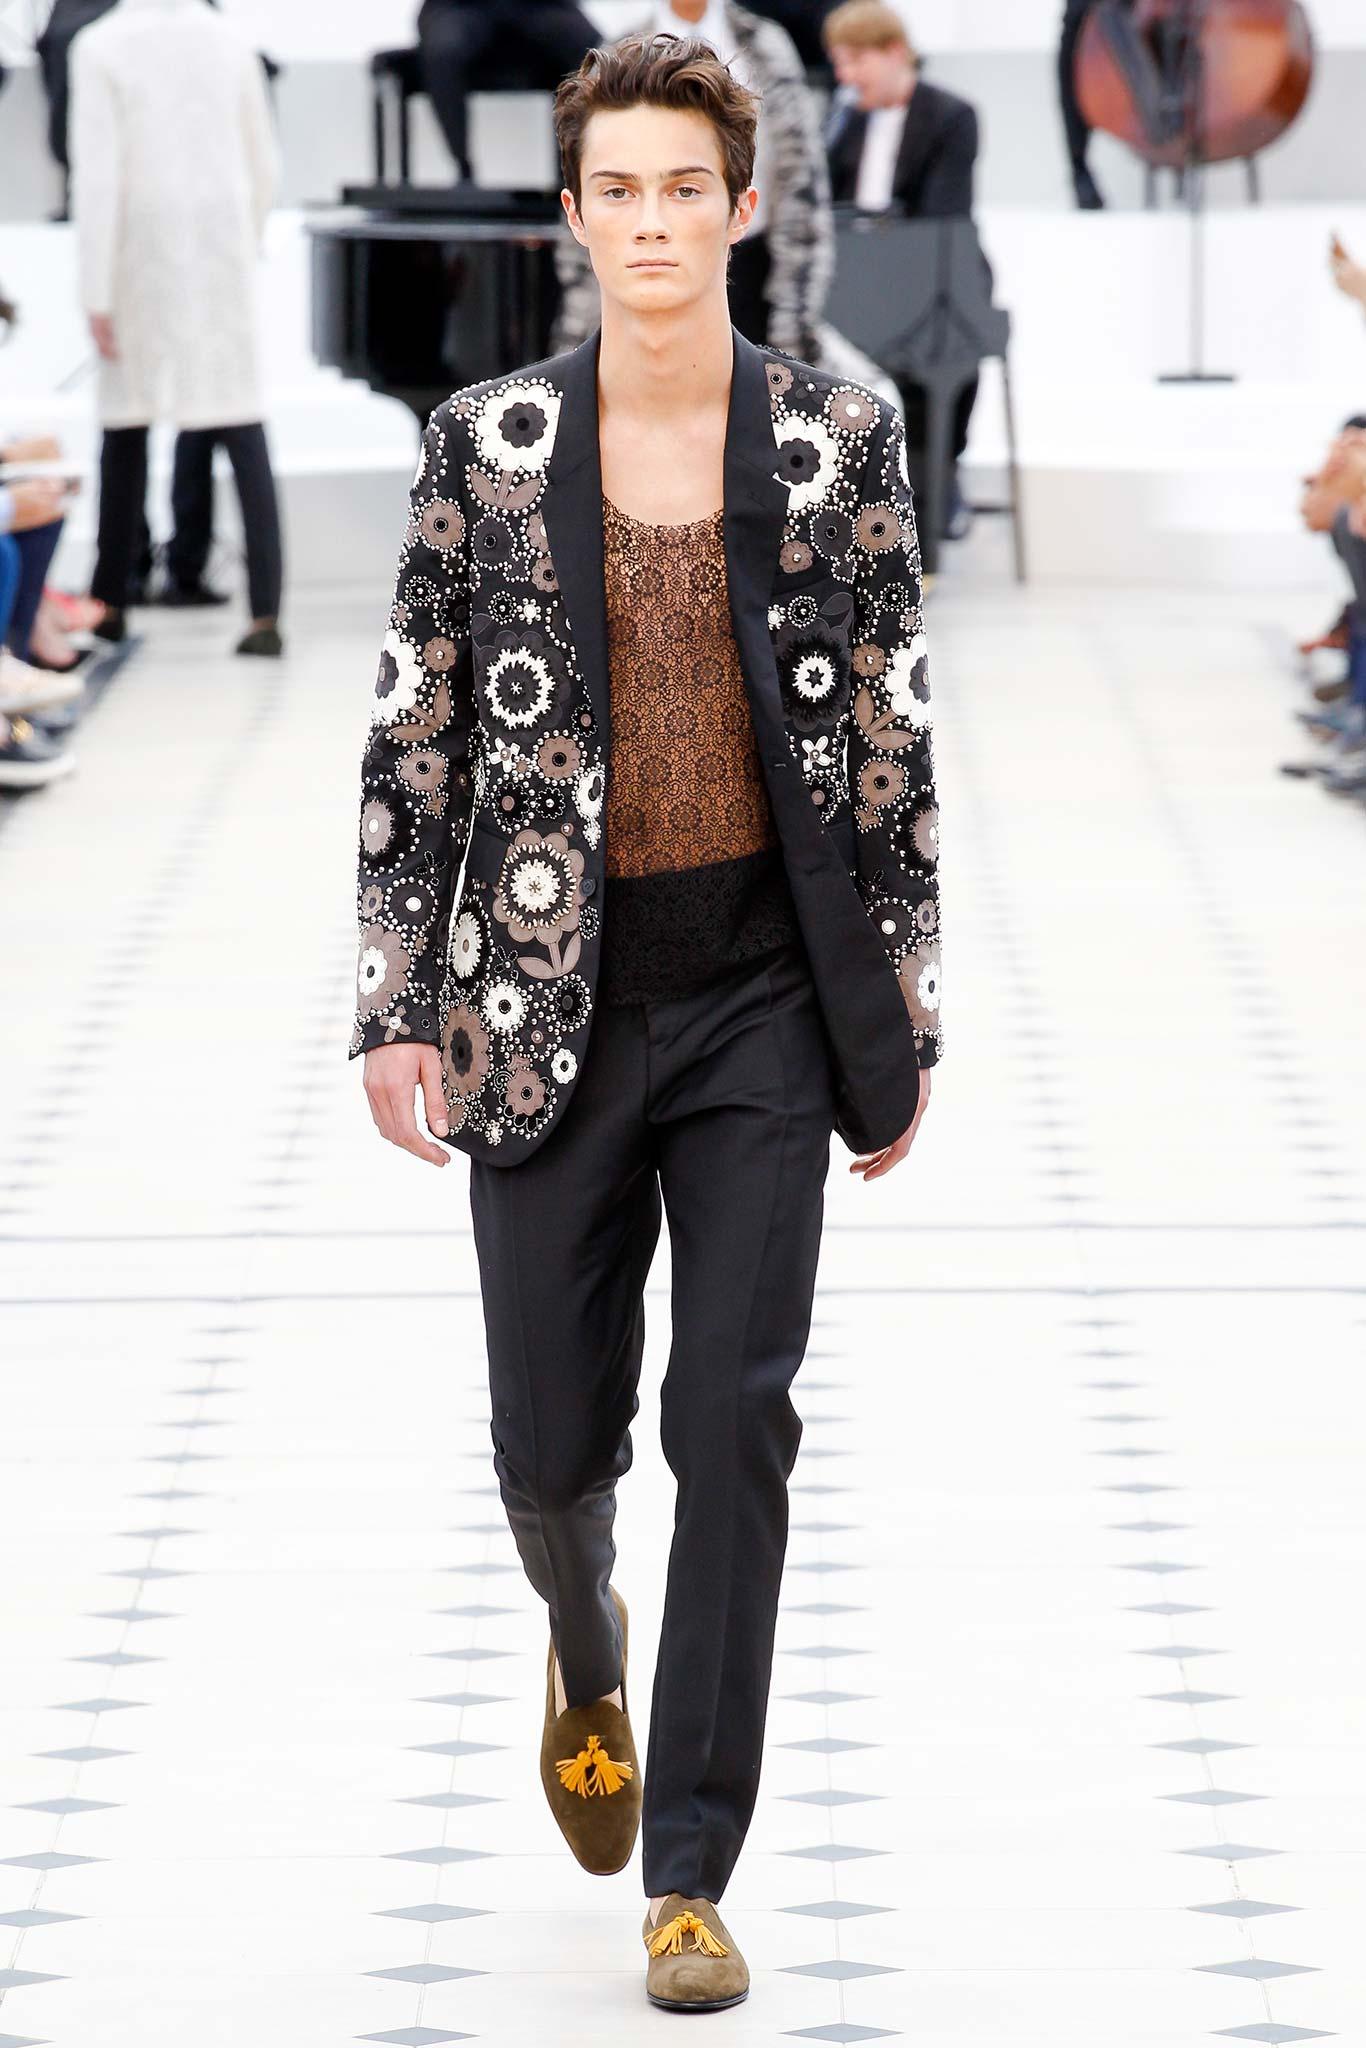 Burberry Prorsum Black & Multi-color wool Jacket from Christopher Bailey's Spring Summer 2016 menswear collection.
 Featuring studded and leather floral embellishments throughout, notched lapels, single slit pocket at chest, dual flap pockets at